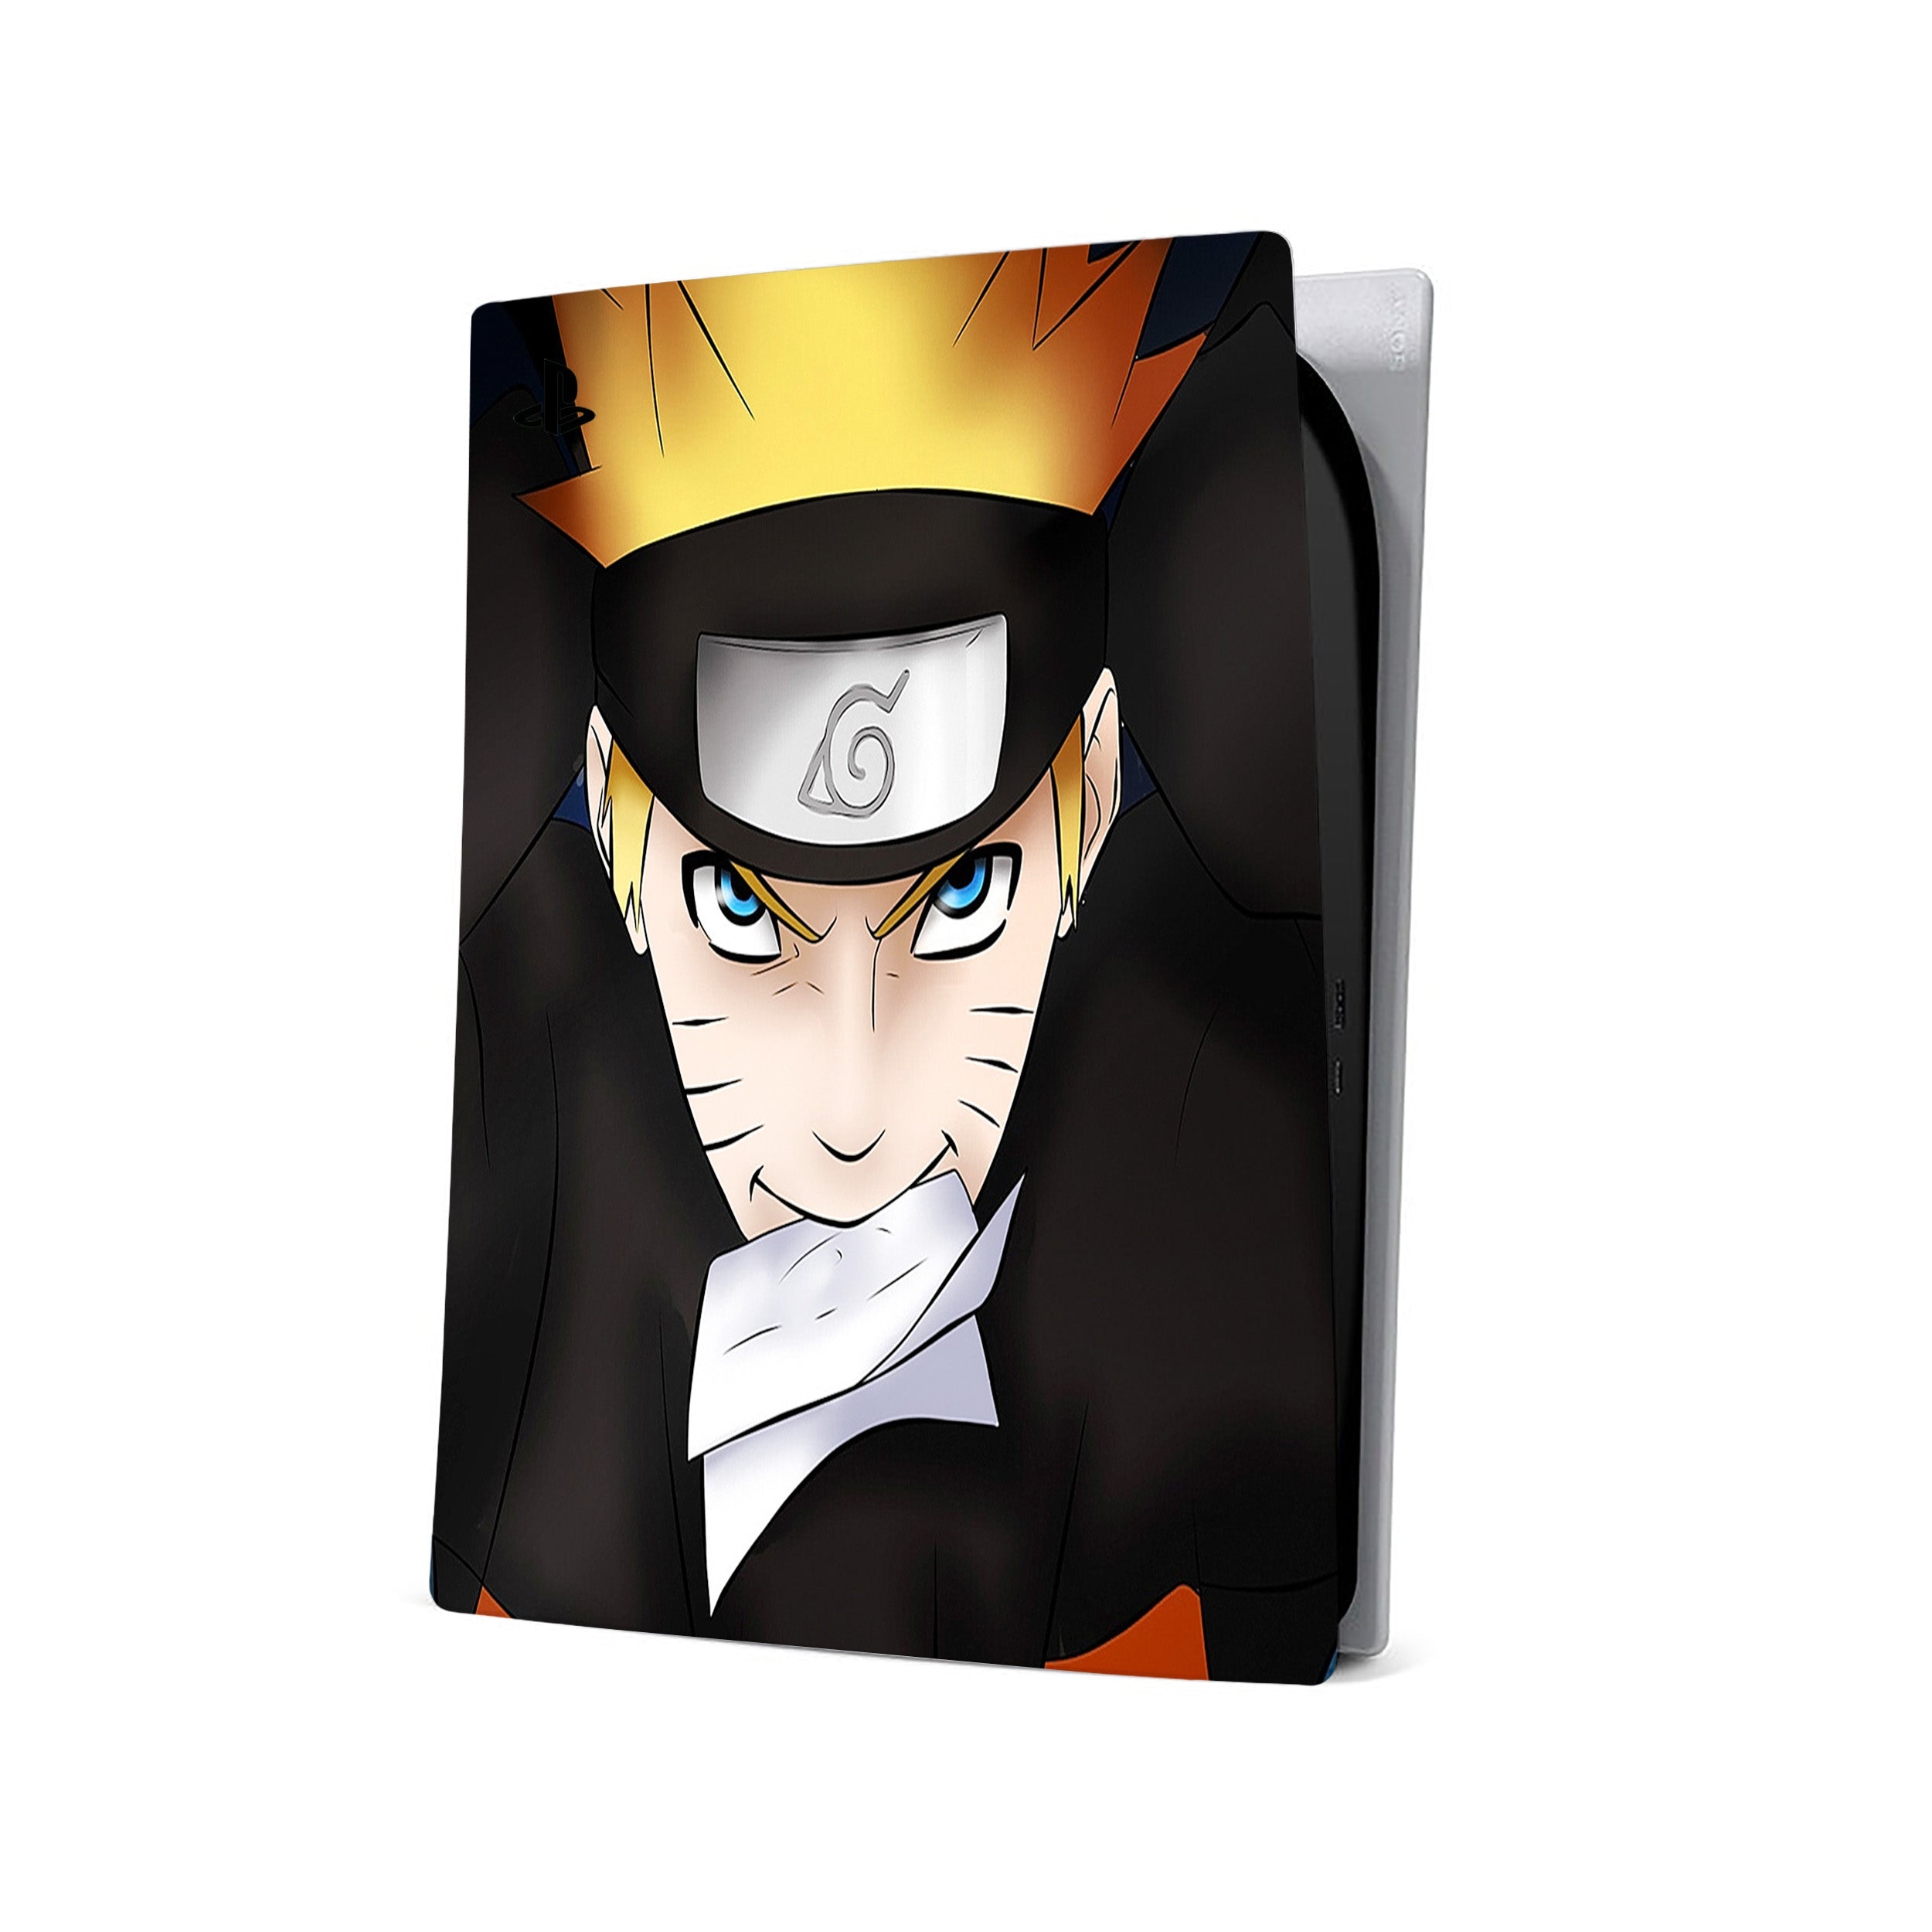 A video game skin featuring a Naruto Approach design for the PS5.